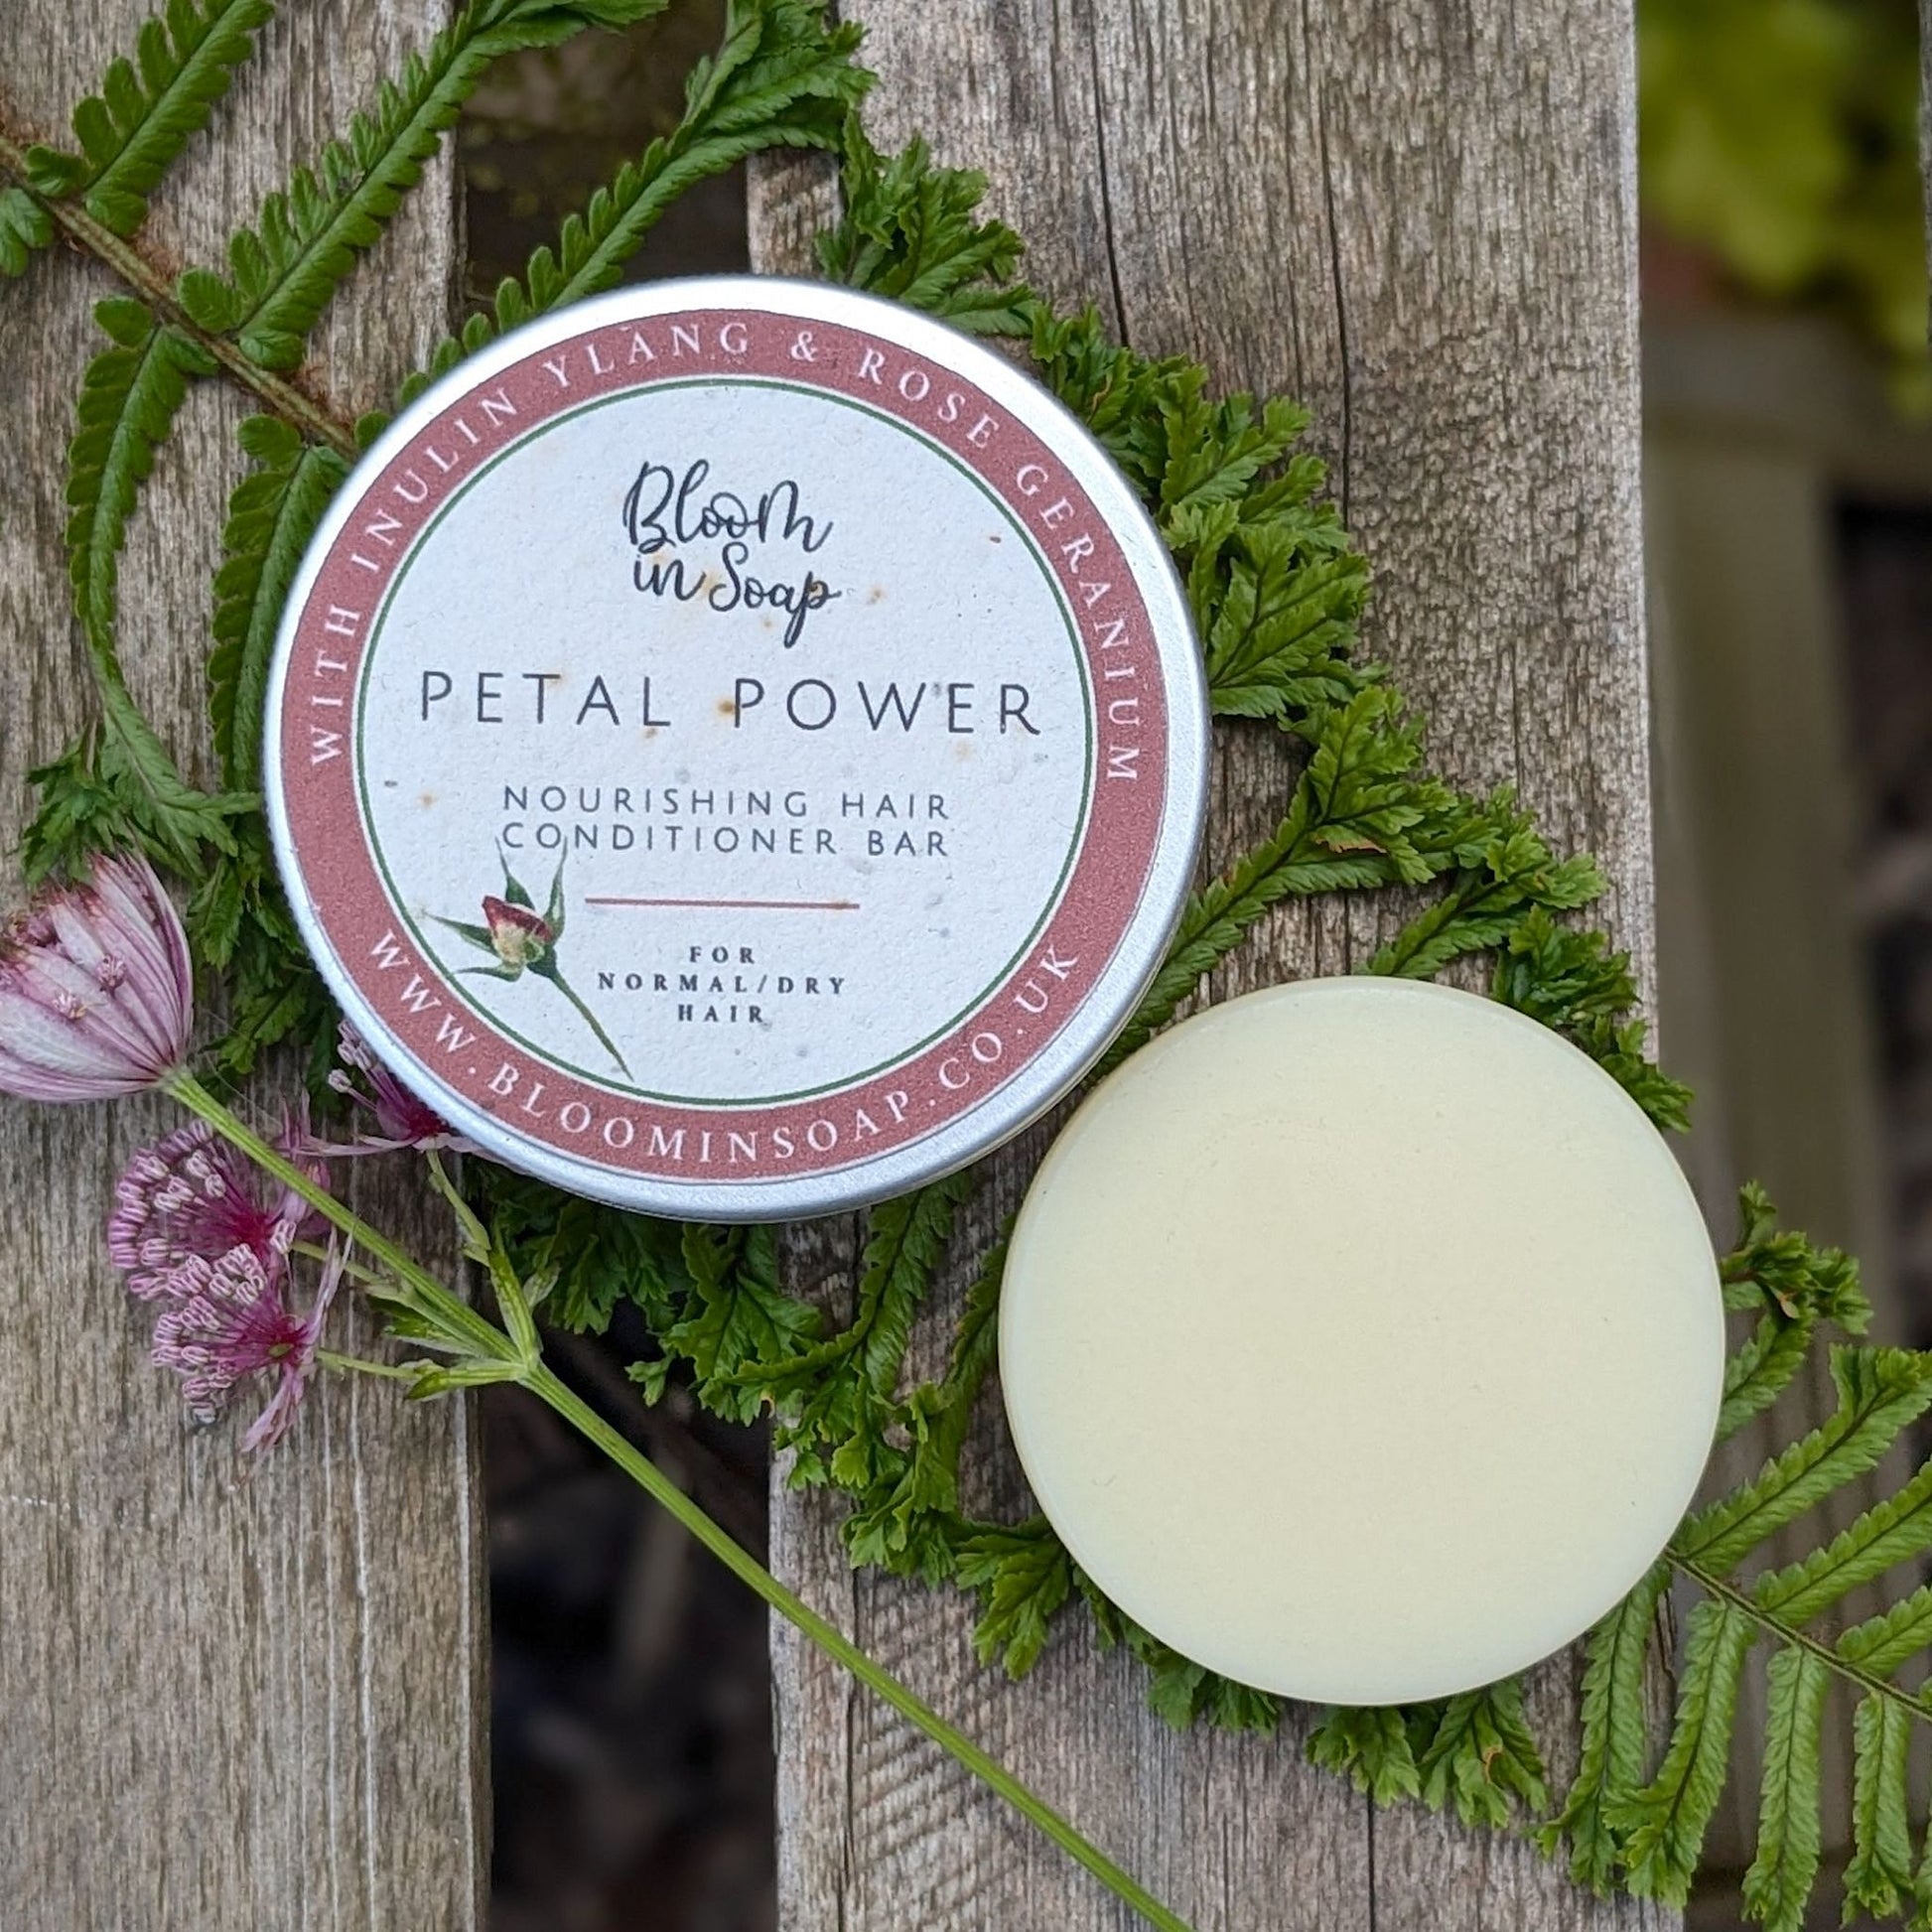 Petal Power conditioner bars from Bloom In Soap